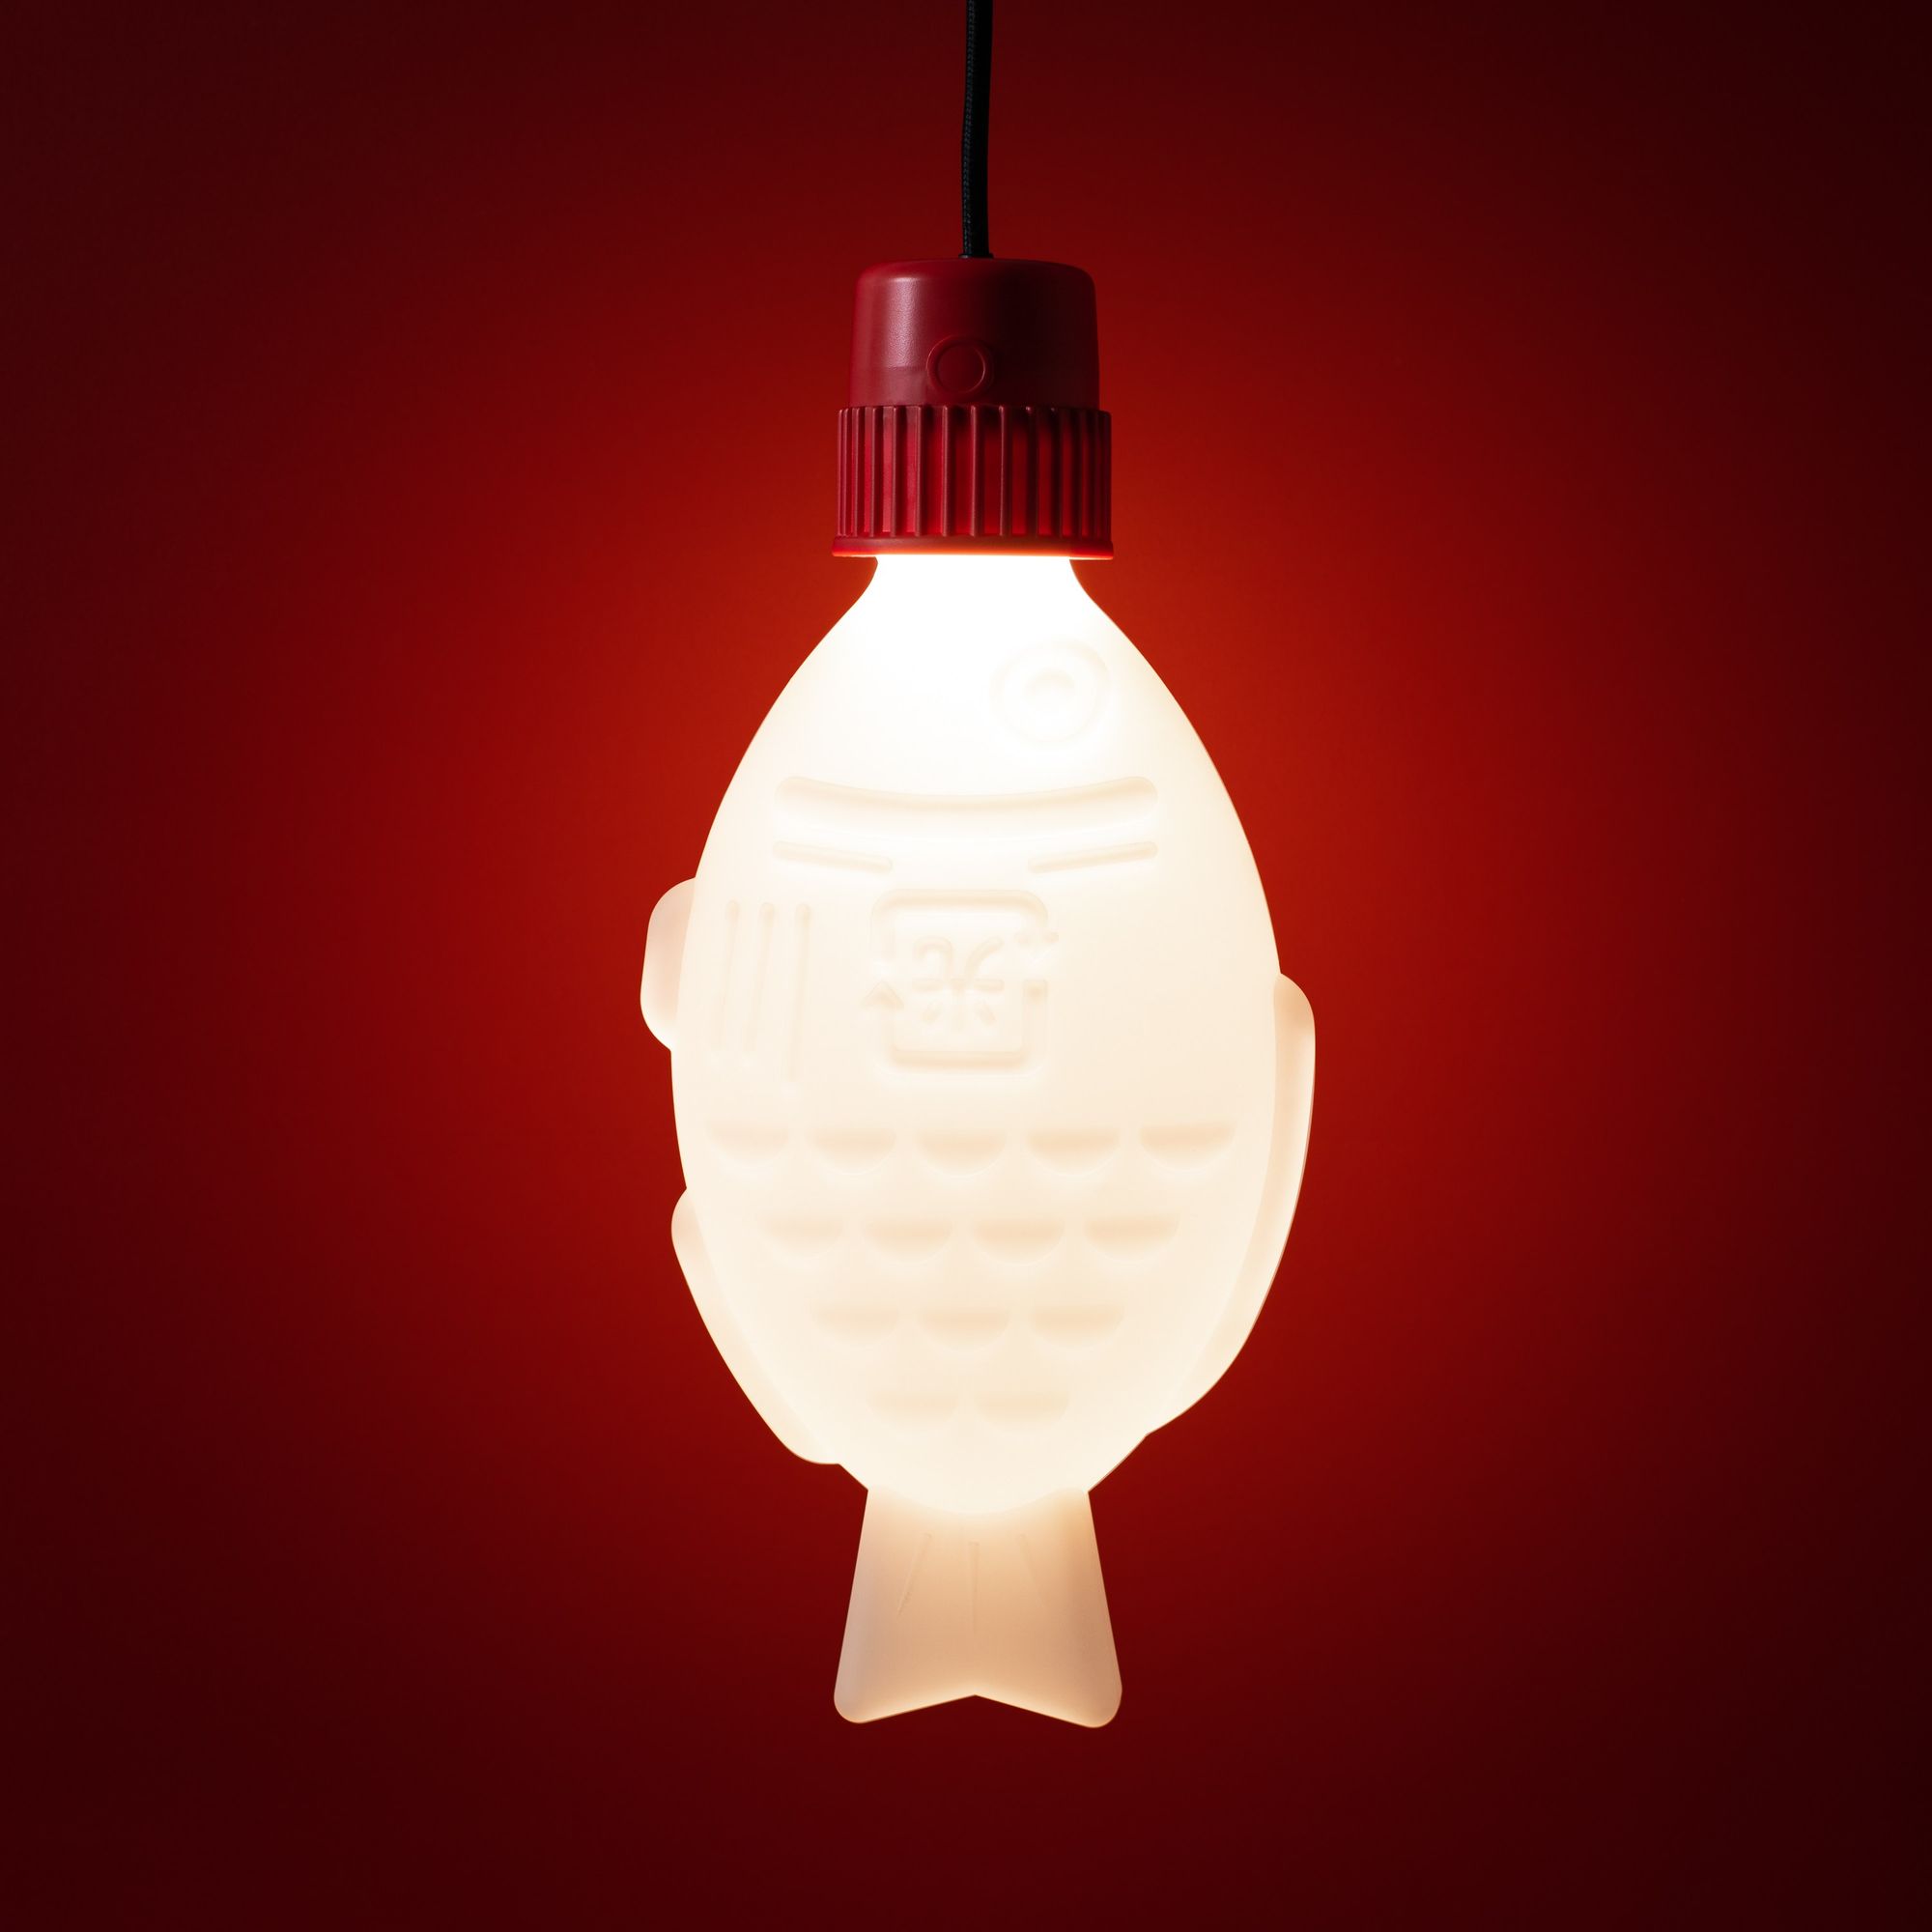 Light Soy by Heliograf showing the pendant light version lit up with a red background